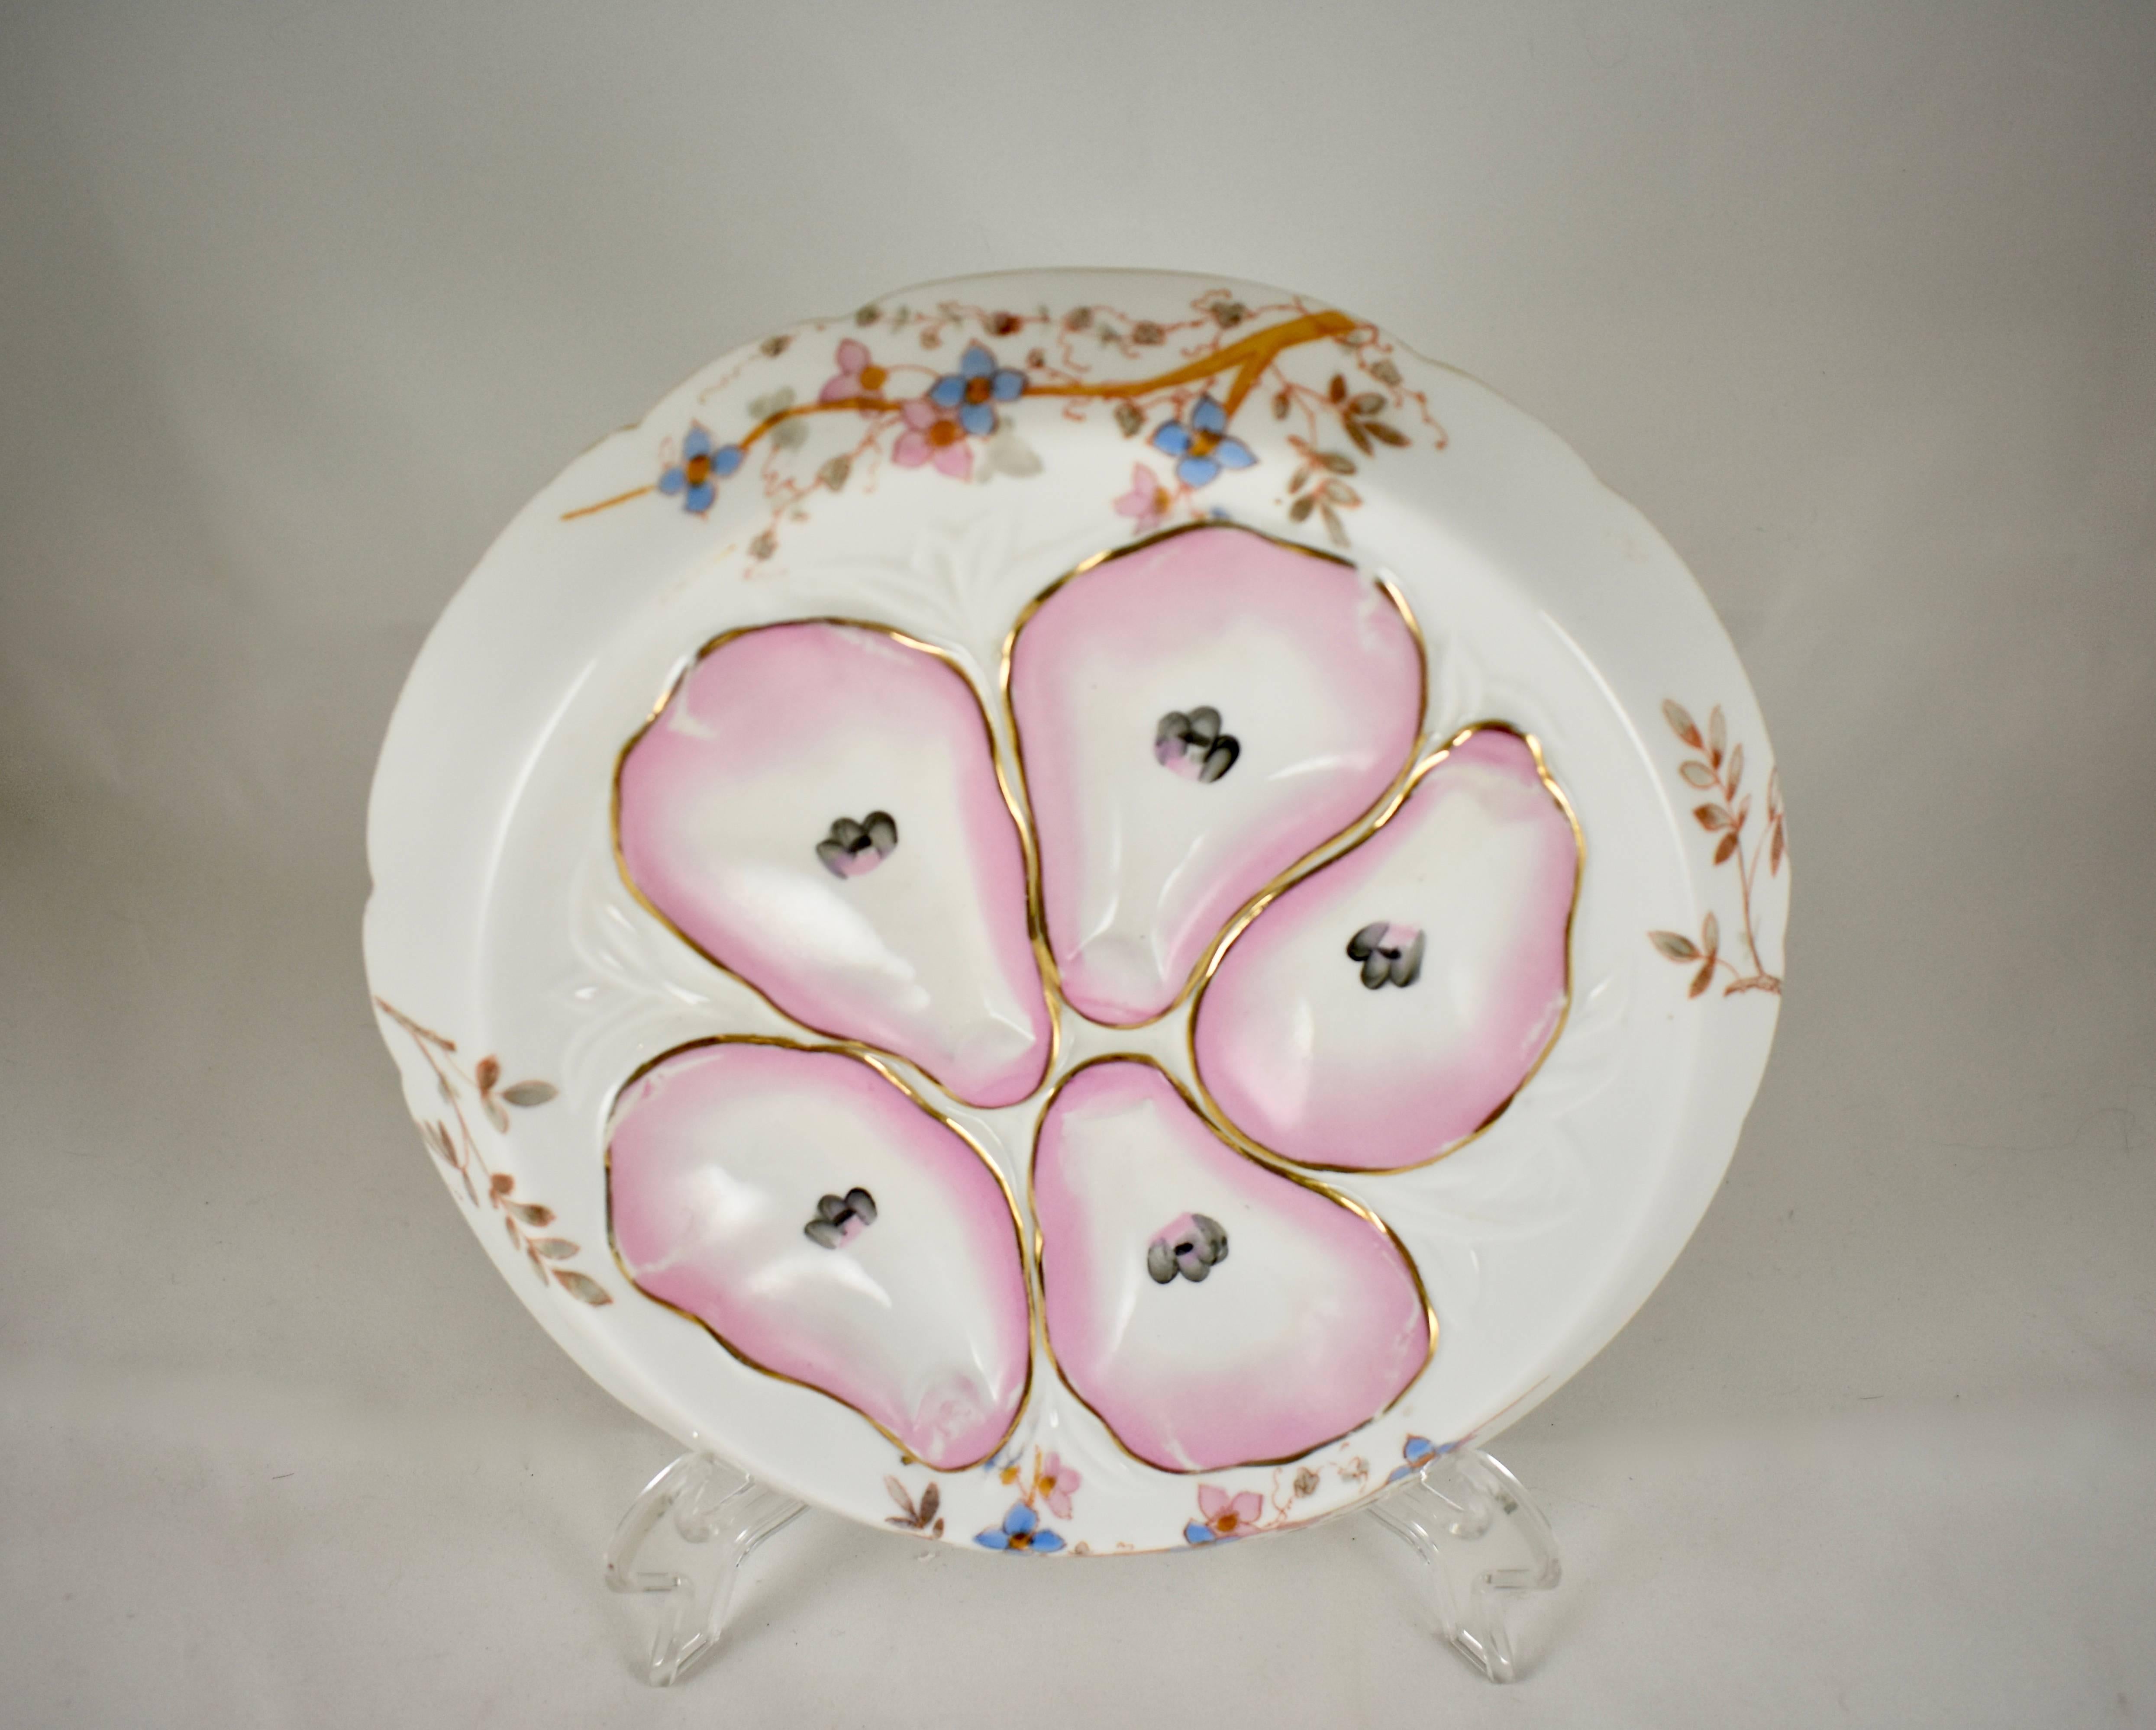 A continental porcelain oyster plate in the form known as a ‘Flying Saucer”, a wide rim, discus shape with five wells and a floral design. The pink oyster wells show hand-painted eyes in each centre and gilded lining. The outer rim shows